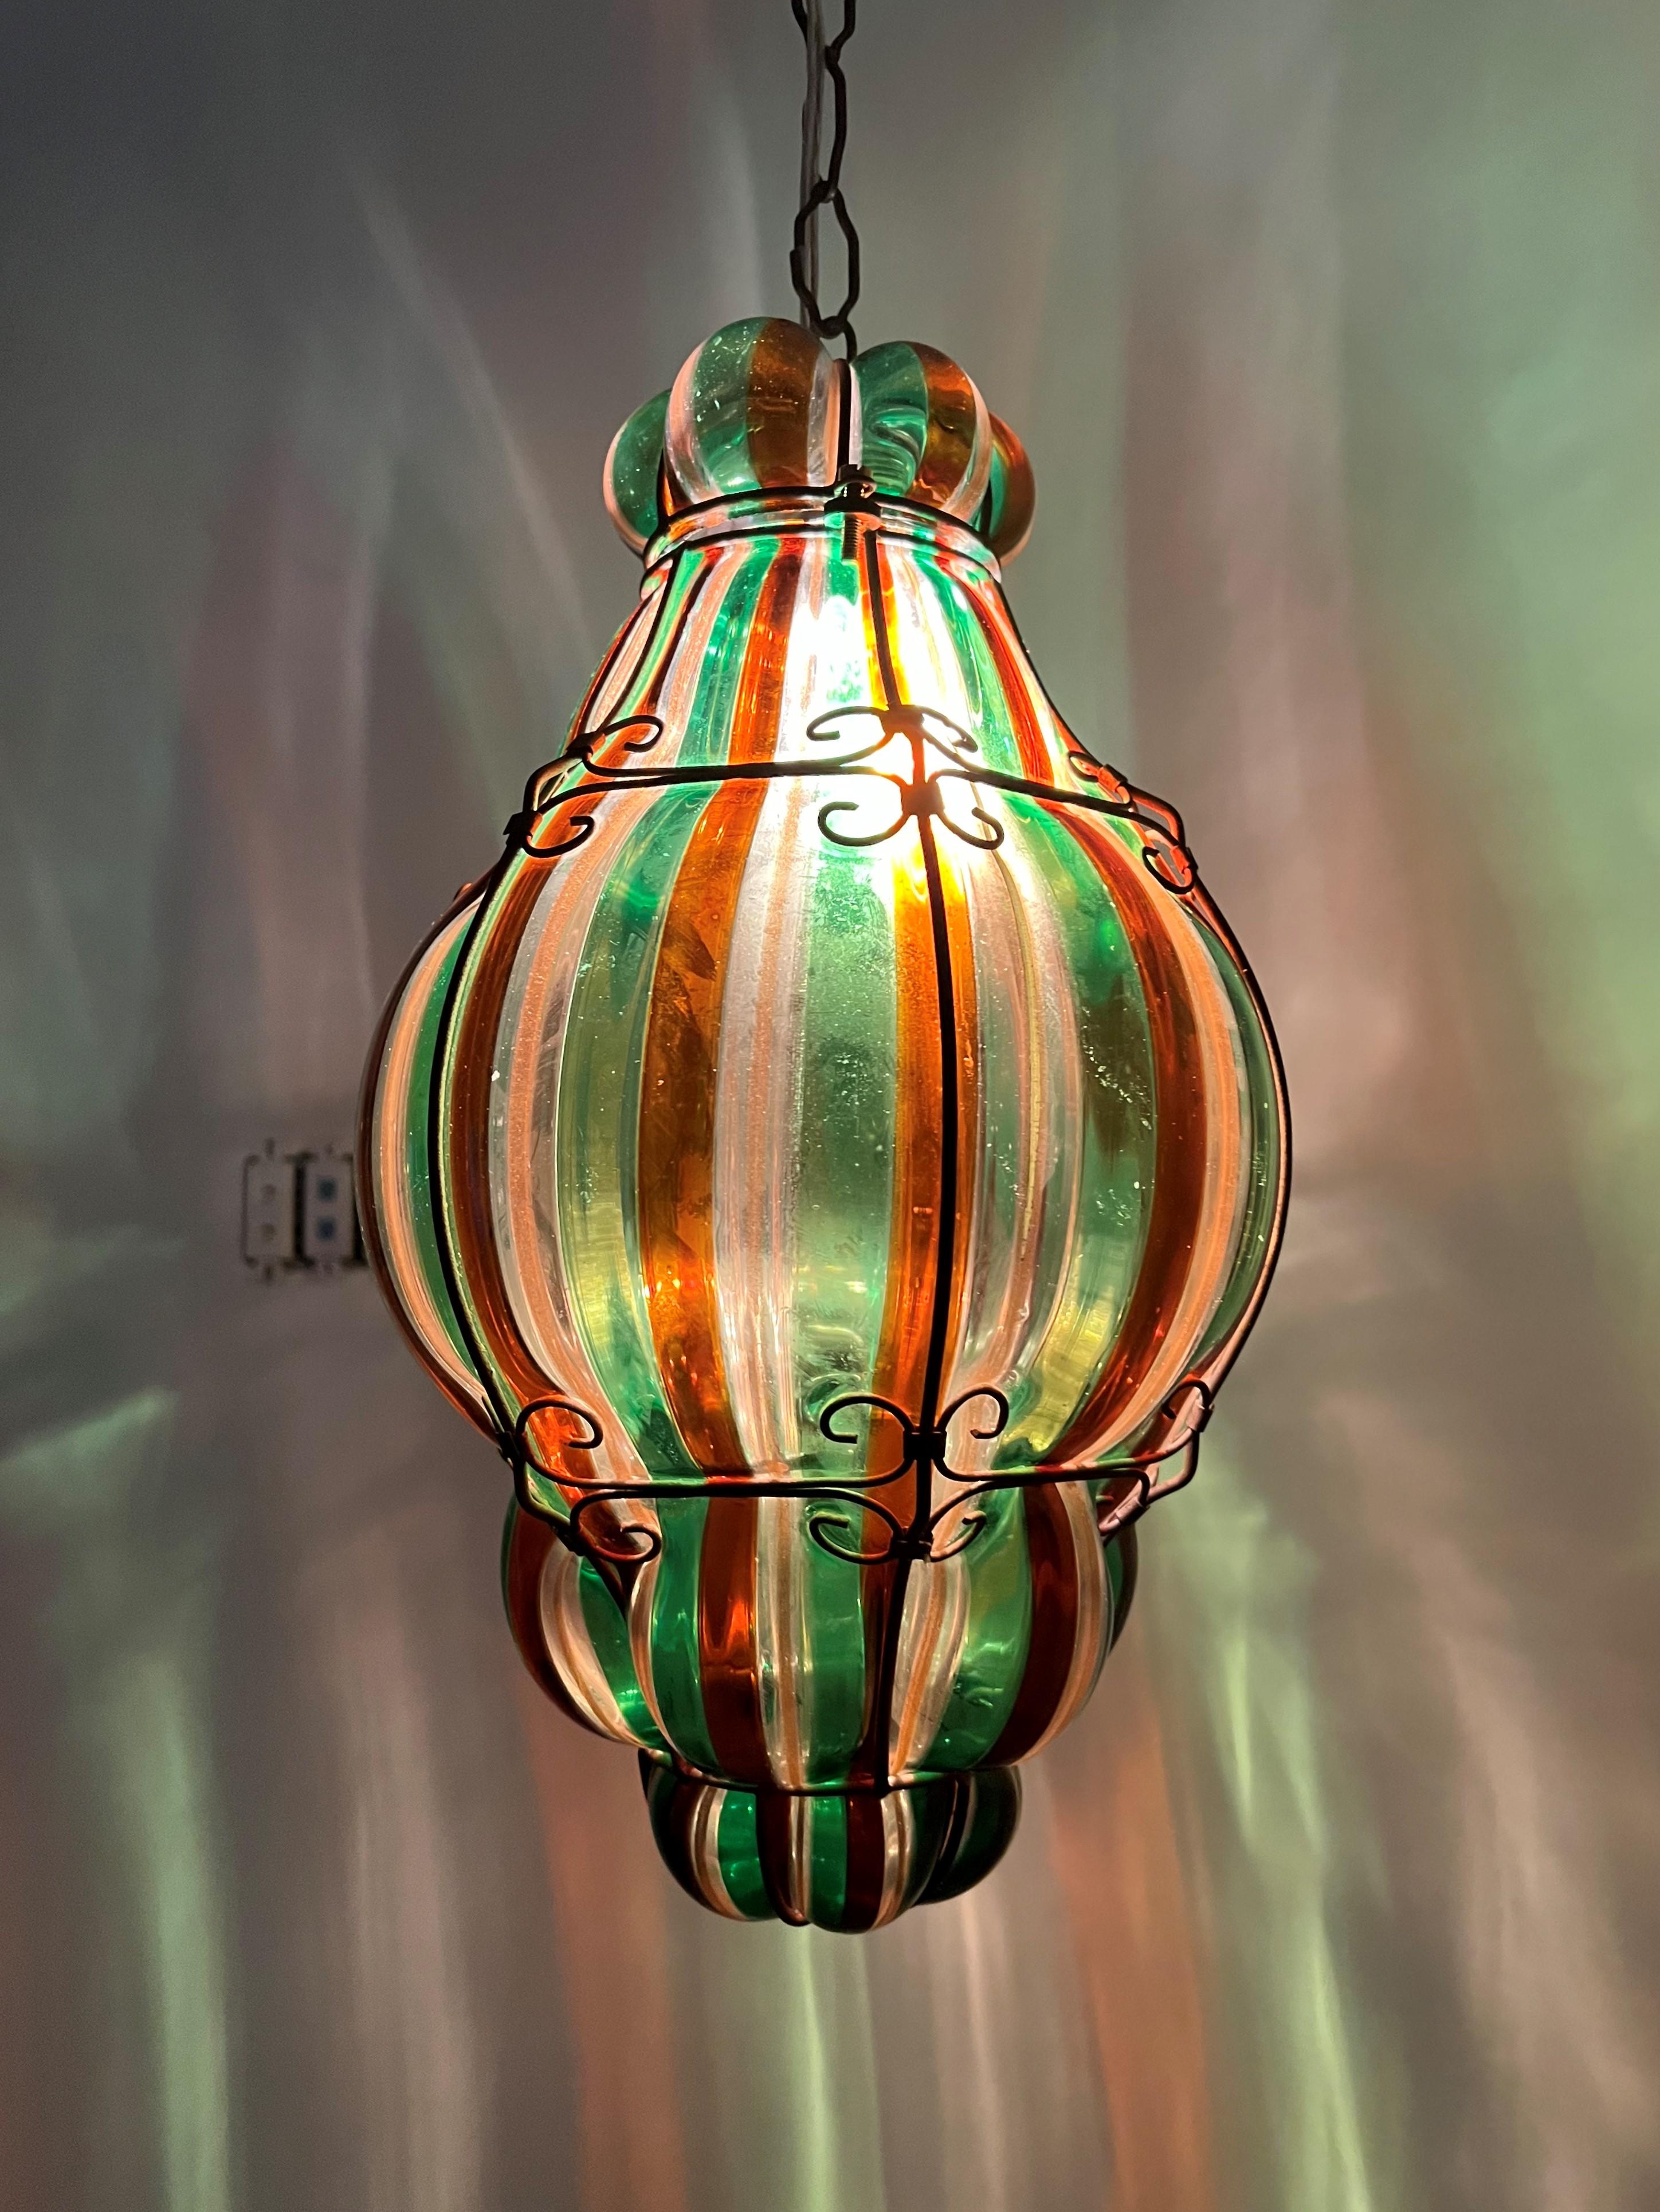 Designer:
Fulvio Bianconi (1915-1996)

Ceiling Light / lantern circa 1940s, manufactured by Venini in multicoloured Murano blown glass and steel armature.
The glass presents no damages but the armature has rusted. This can be corrected and